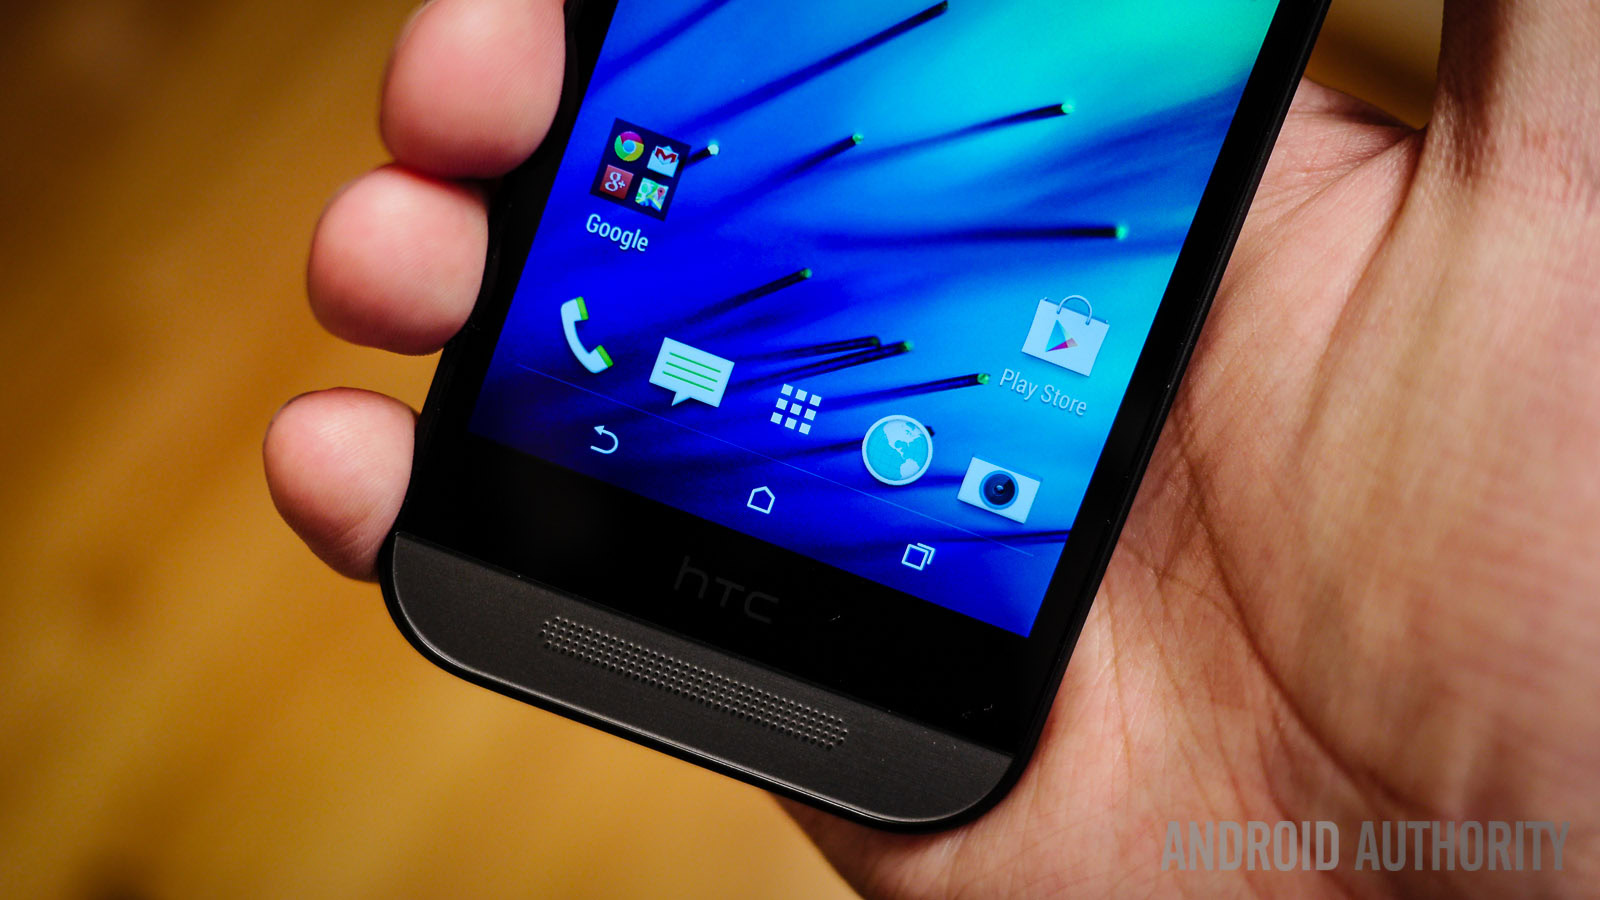 htc one mini 2 first look (9 of 22)